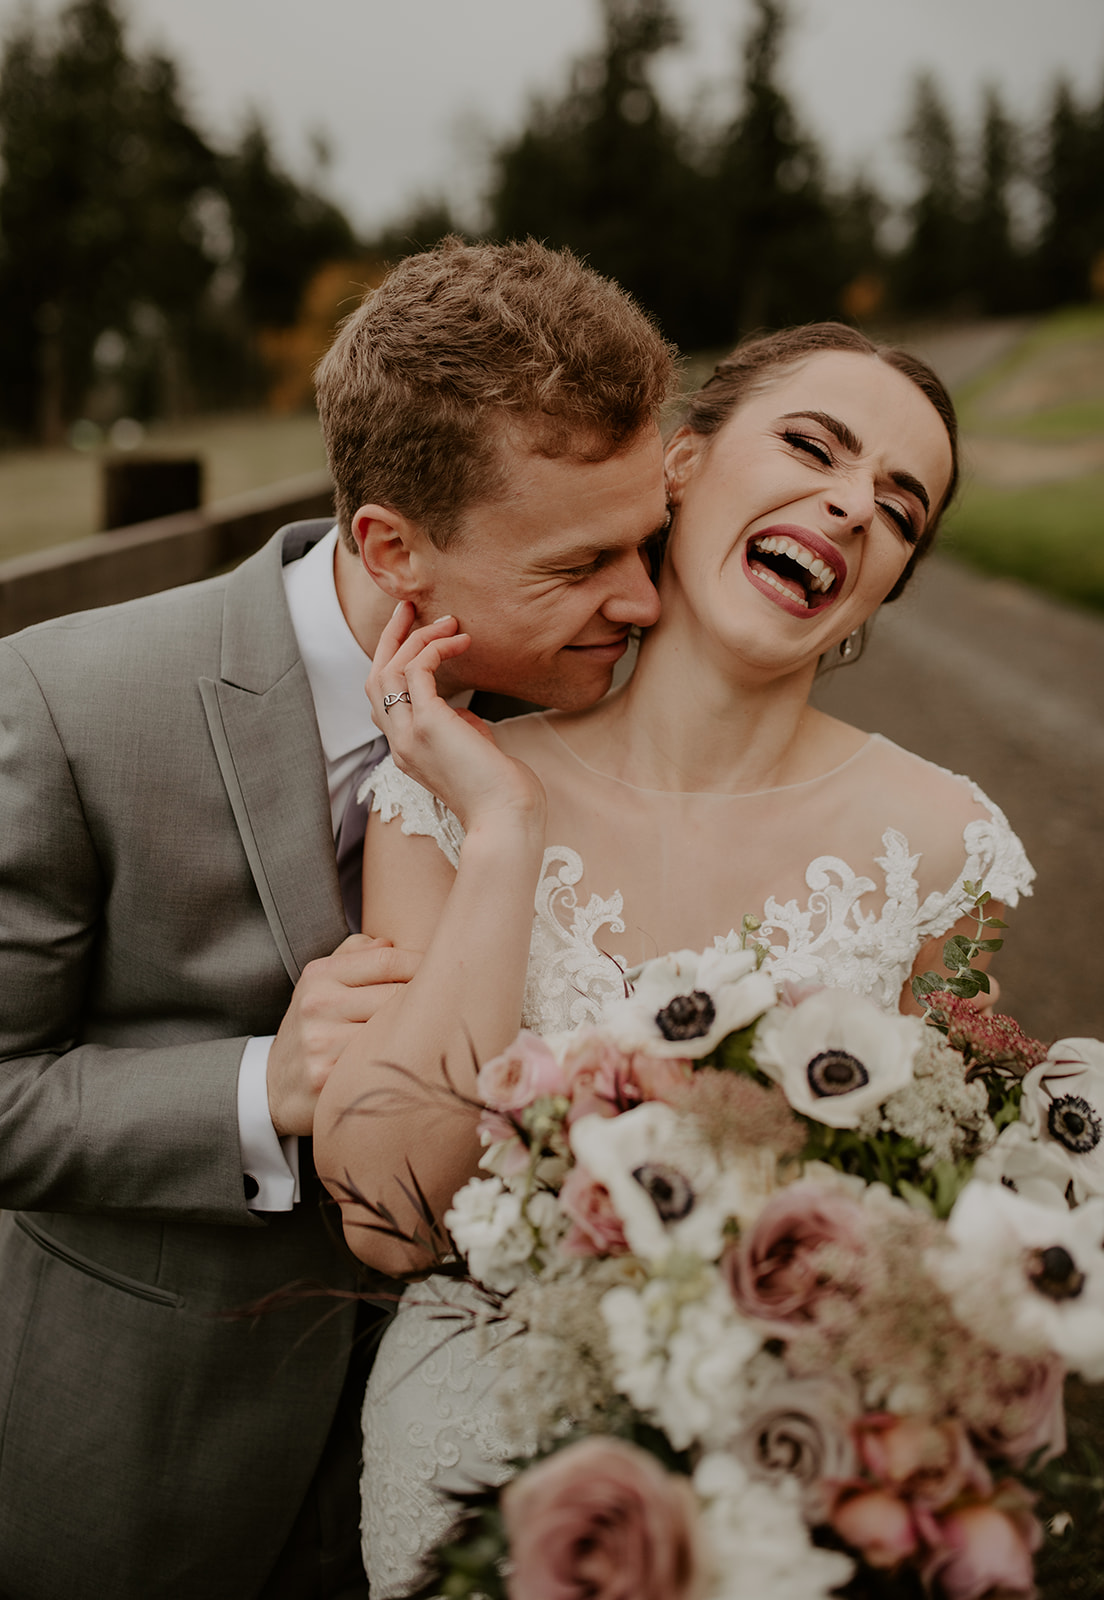 Couple laughing and embracing while holding bouquet